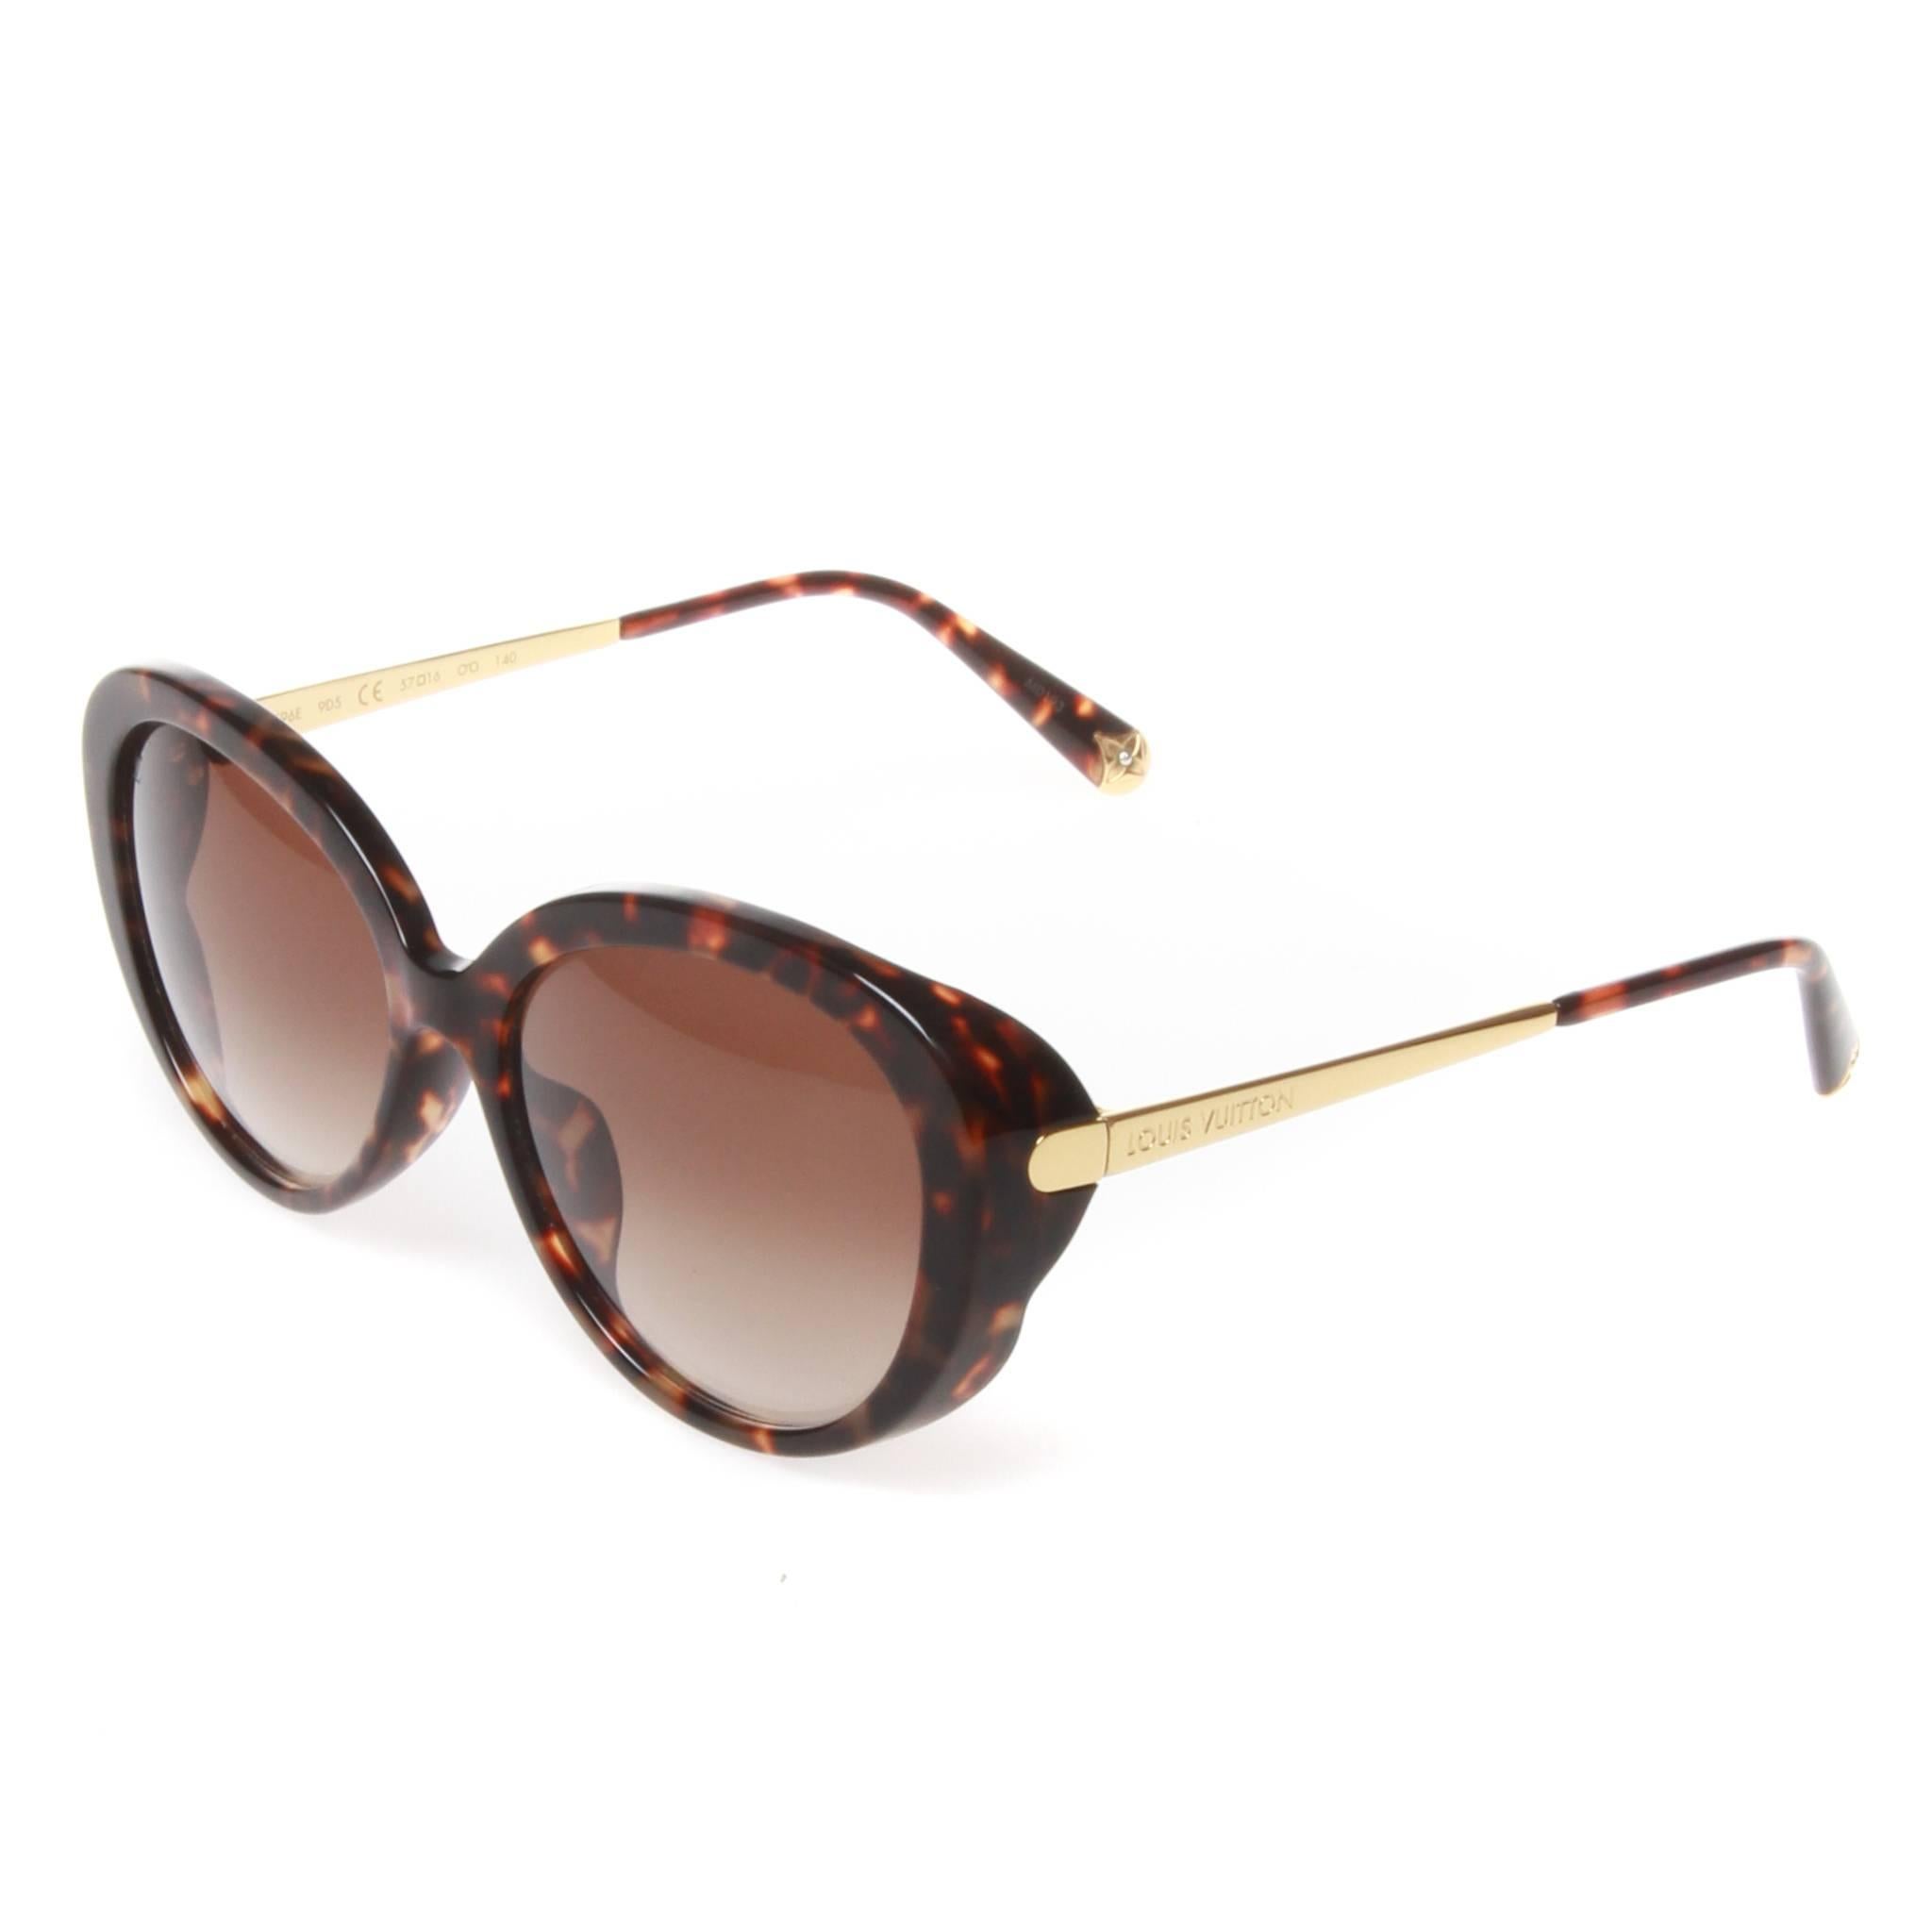 Louis Vuitton Bluebell Sunglasses in an exclusive dark tortoiseshell acetate with goldtone accents. Beautifully rounded and inspired by the floral motifs of the classic Monogram design. The brown gradient lenses are category 2 and provide 100% UV